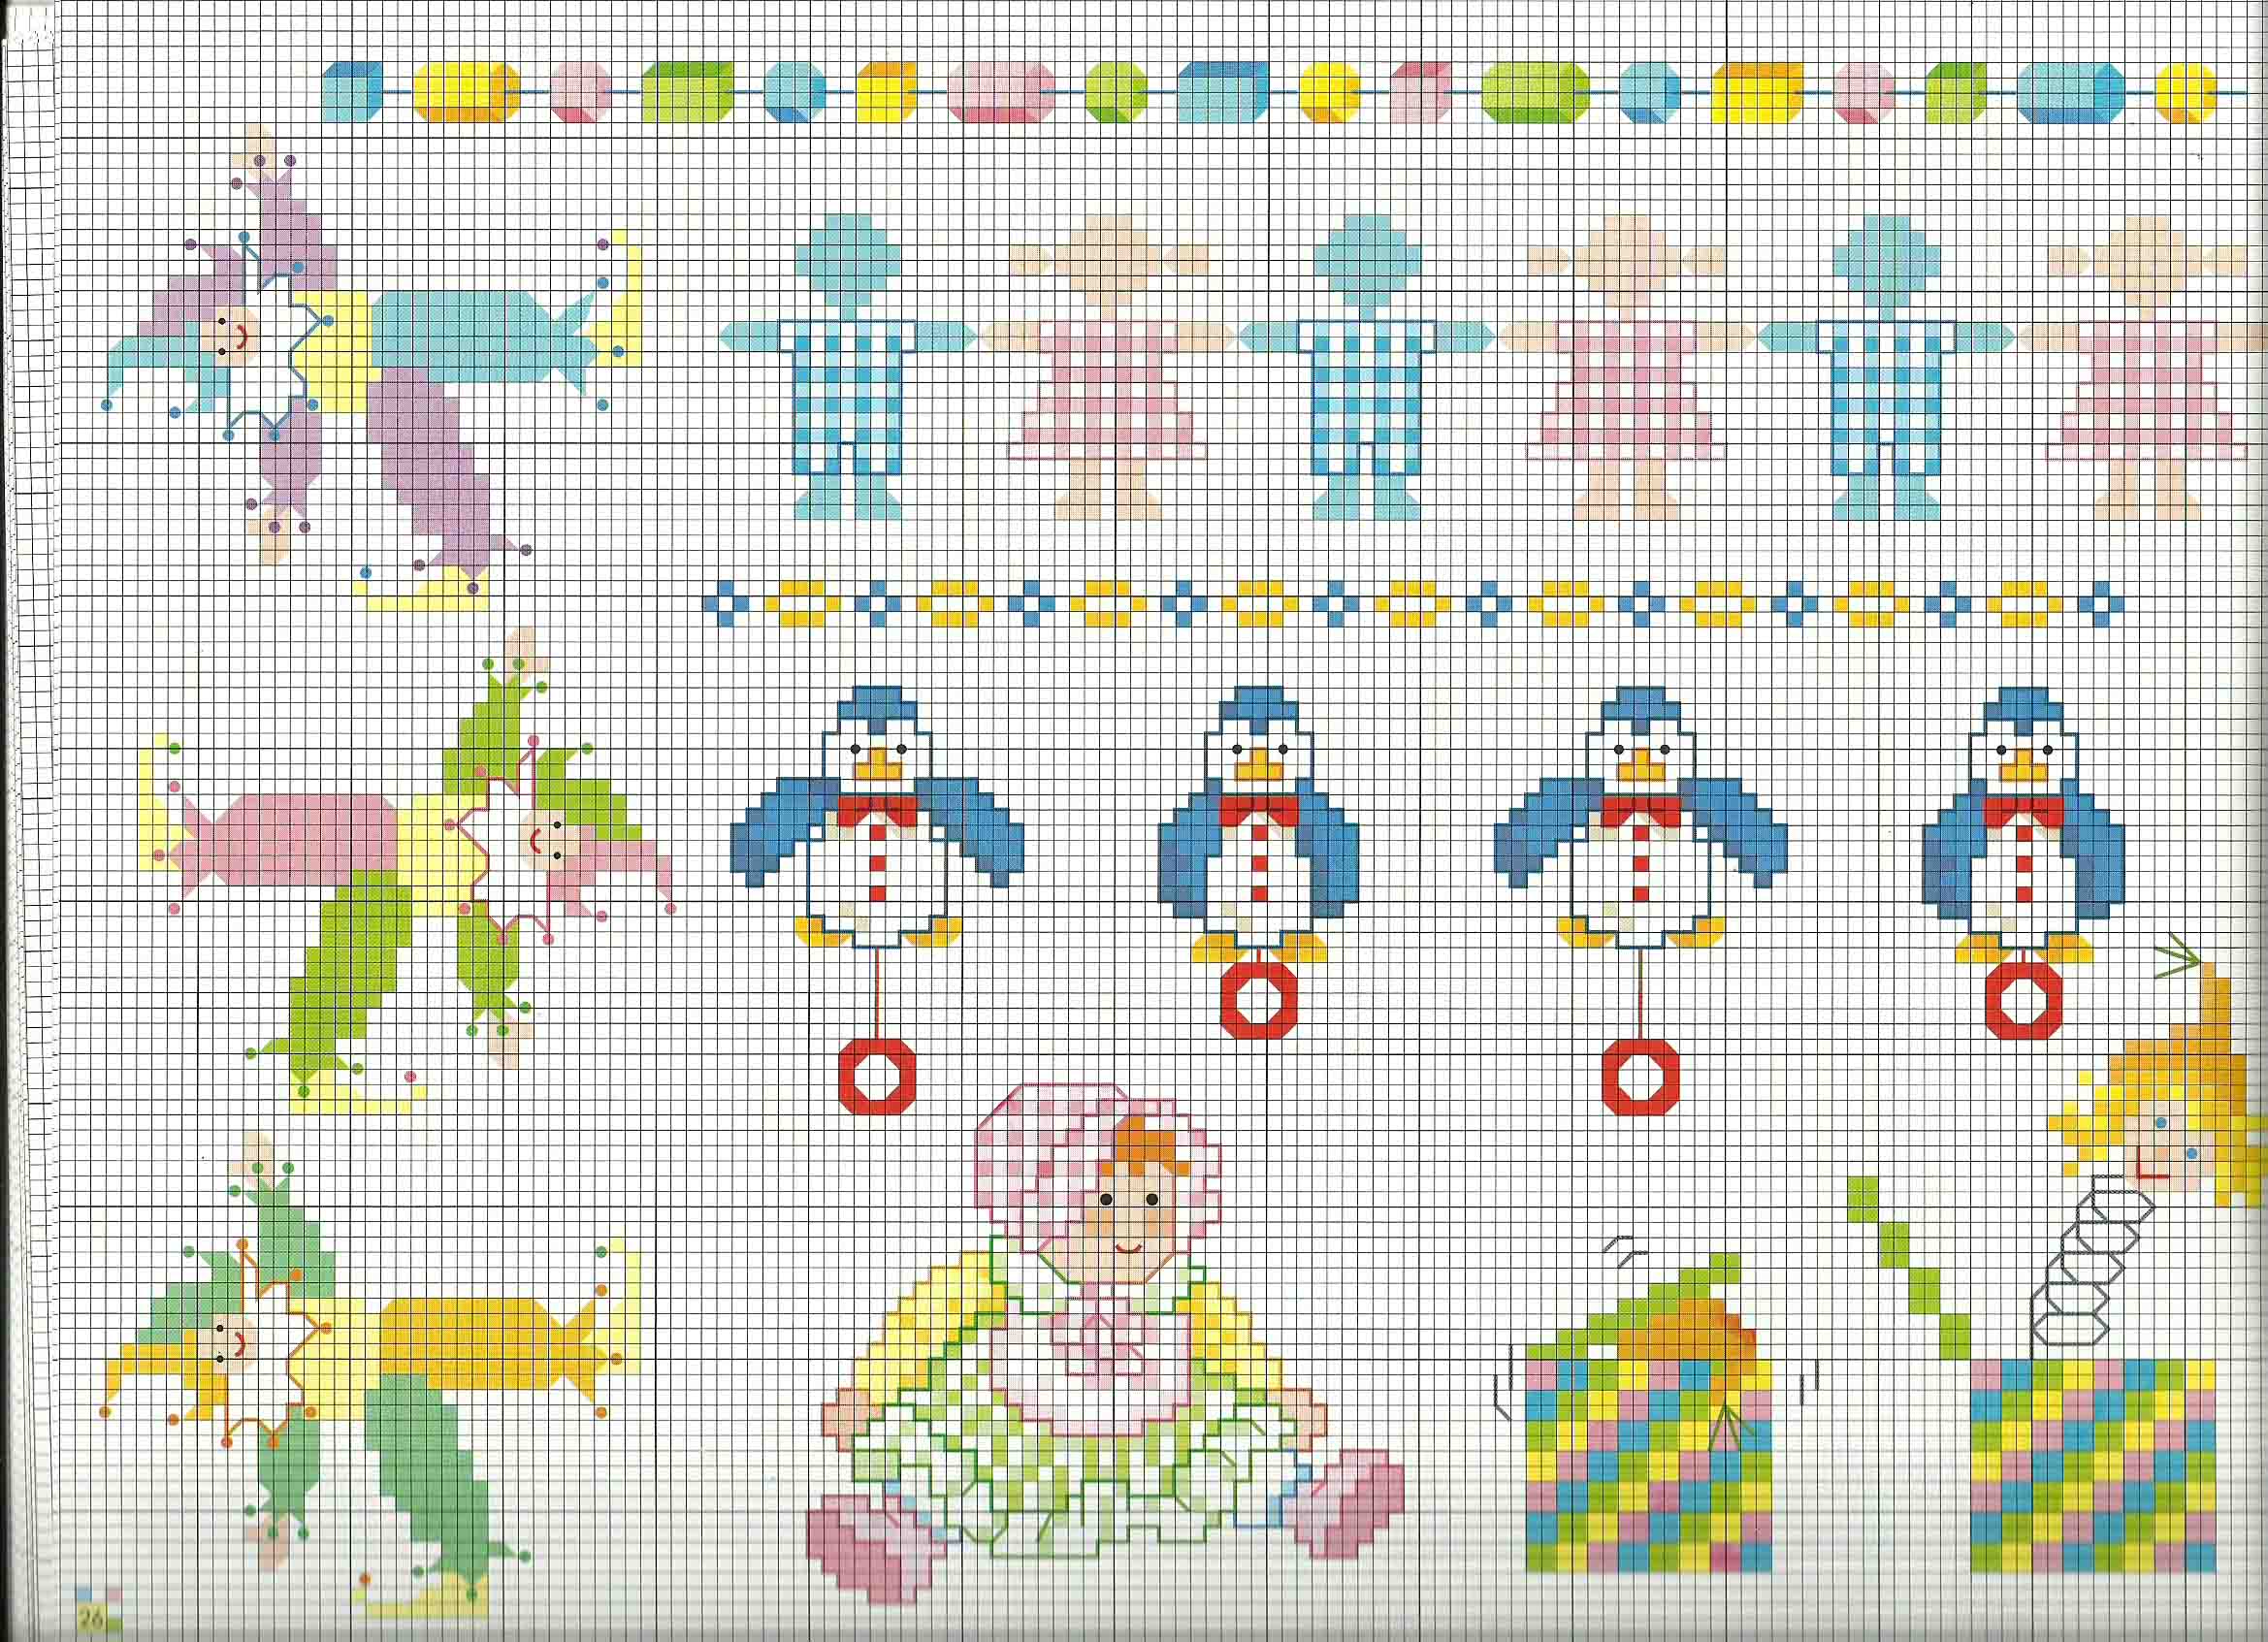 Cross stitch patterns baby blanket ideas the circus